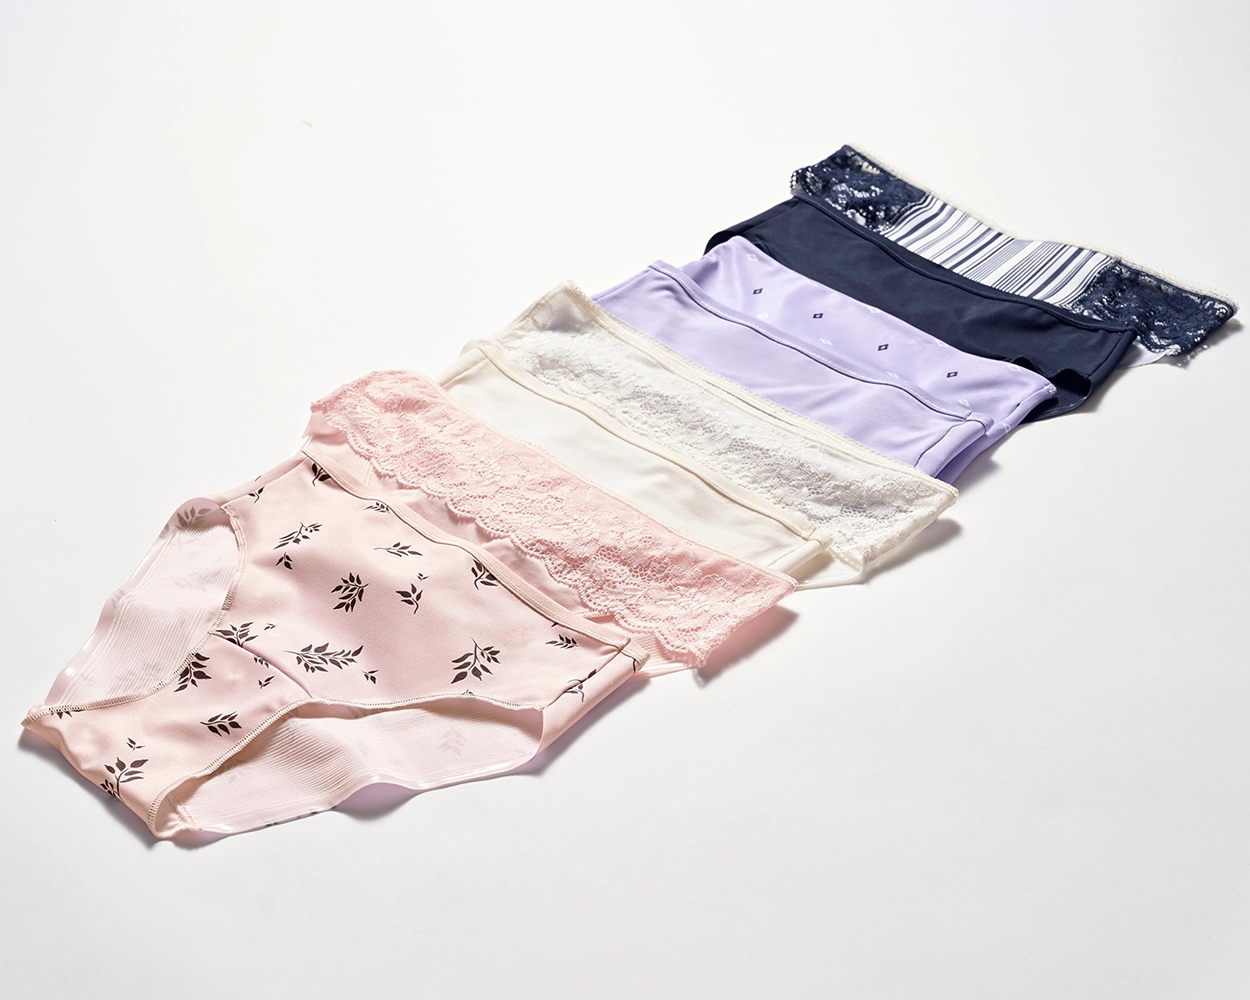 Soma<sup class=st-superscript>®</sup> laydown of pink, white, purple, and blue panties in solids and prints cascading in a row.